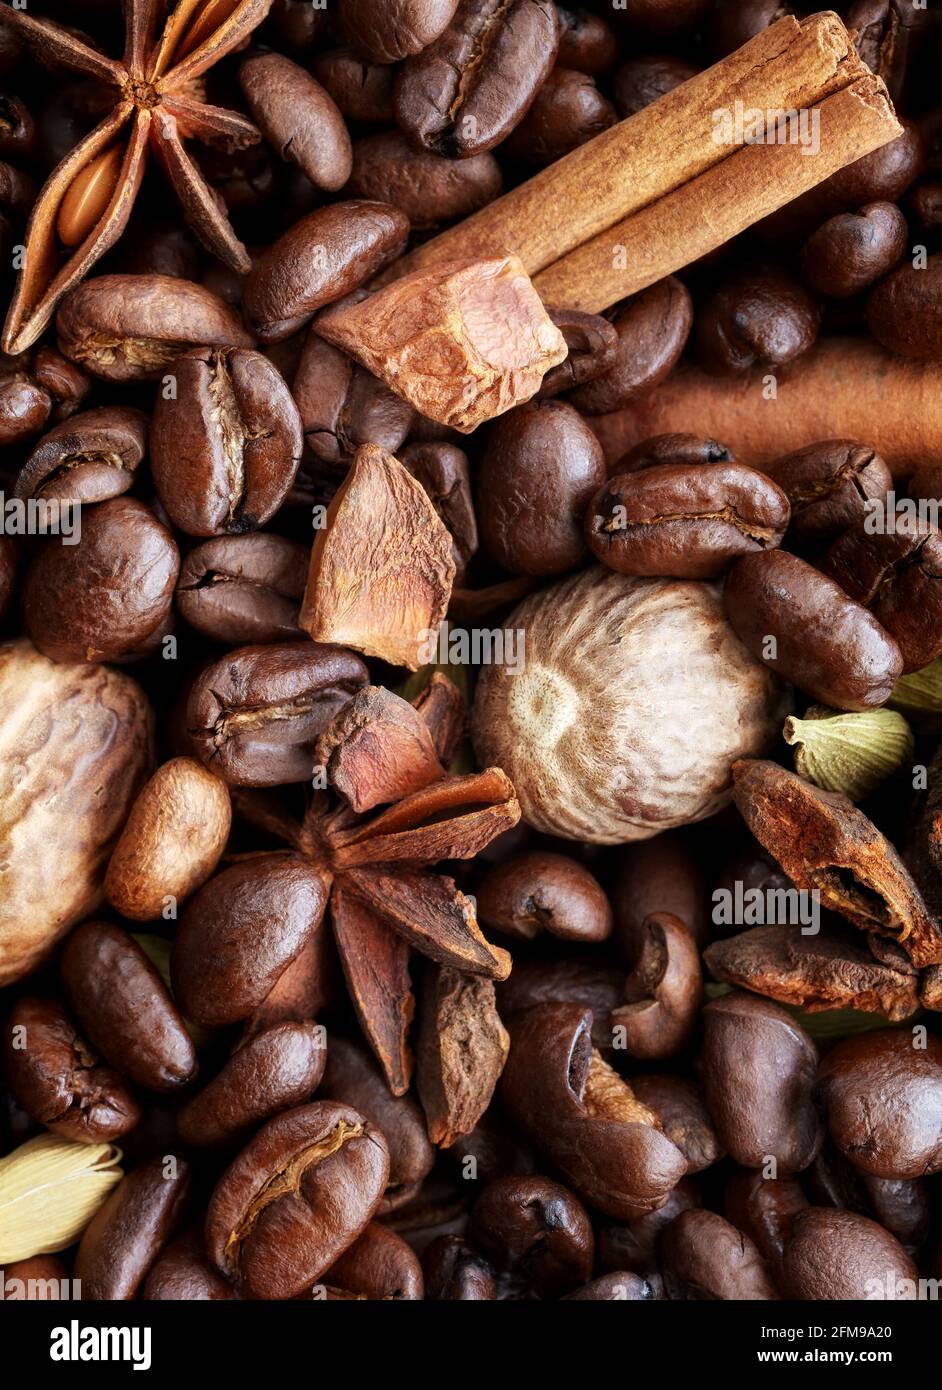 Close up picture of coffee beans, anise, cinnamon stick, cardamom pods and nutmeg, selective focus. Stock Photo